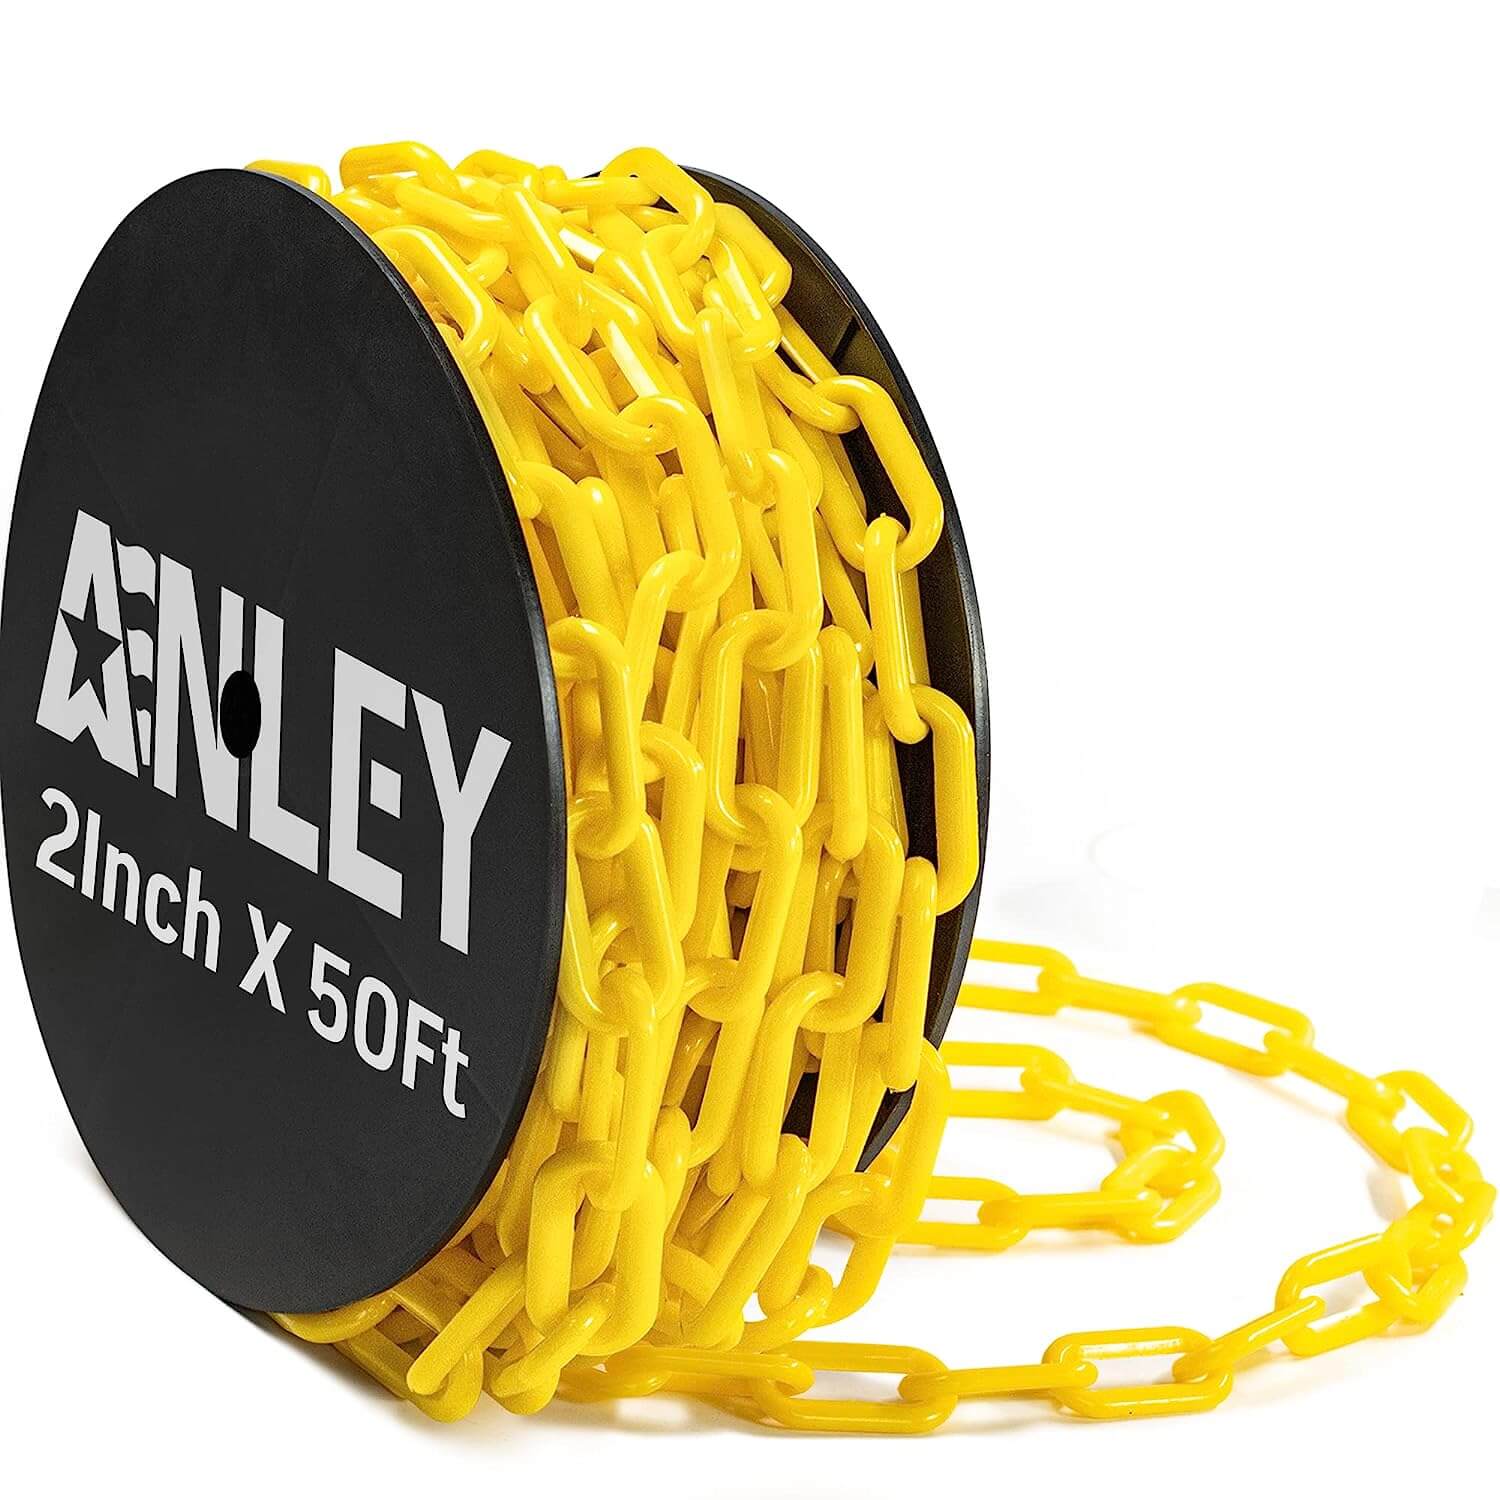 Anley 50 ft Plastic Chain Links - Safety Barrier Chains Rustproof 2 inch x 50 ft